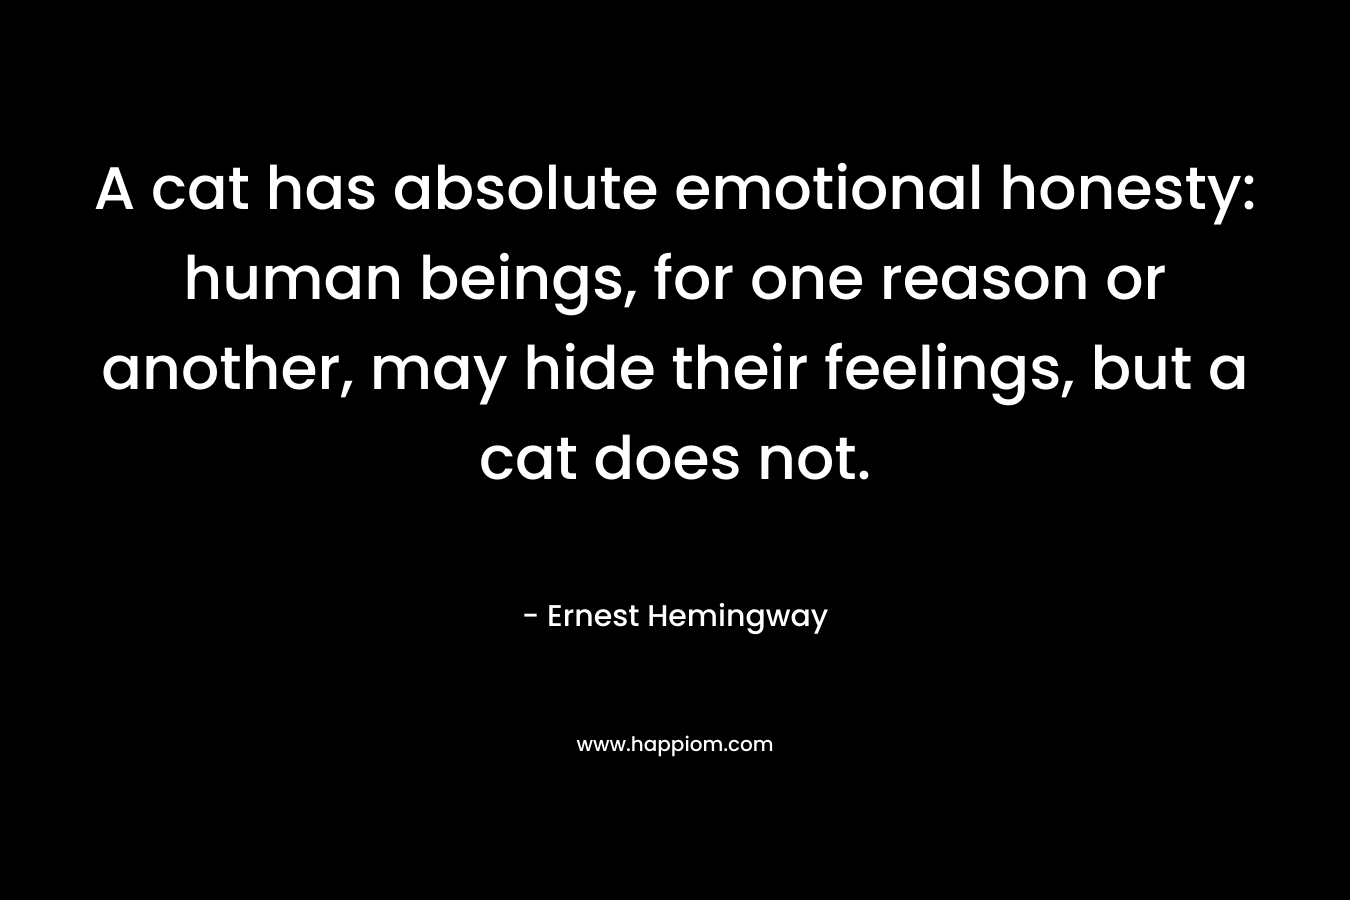 A cat has absolute emotional honesty: human beings, for one reason or another, may hide their feelings, but a cat does not.